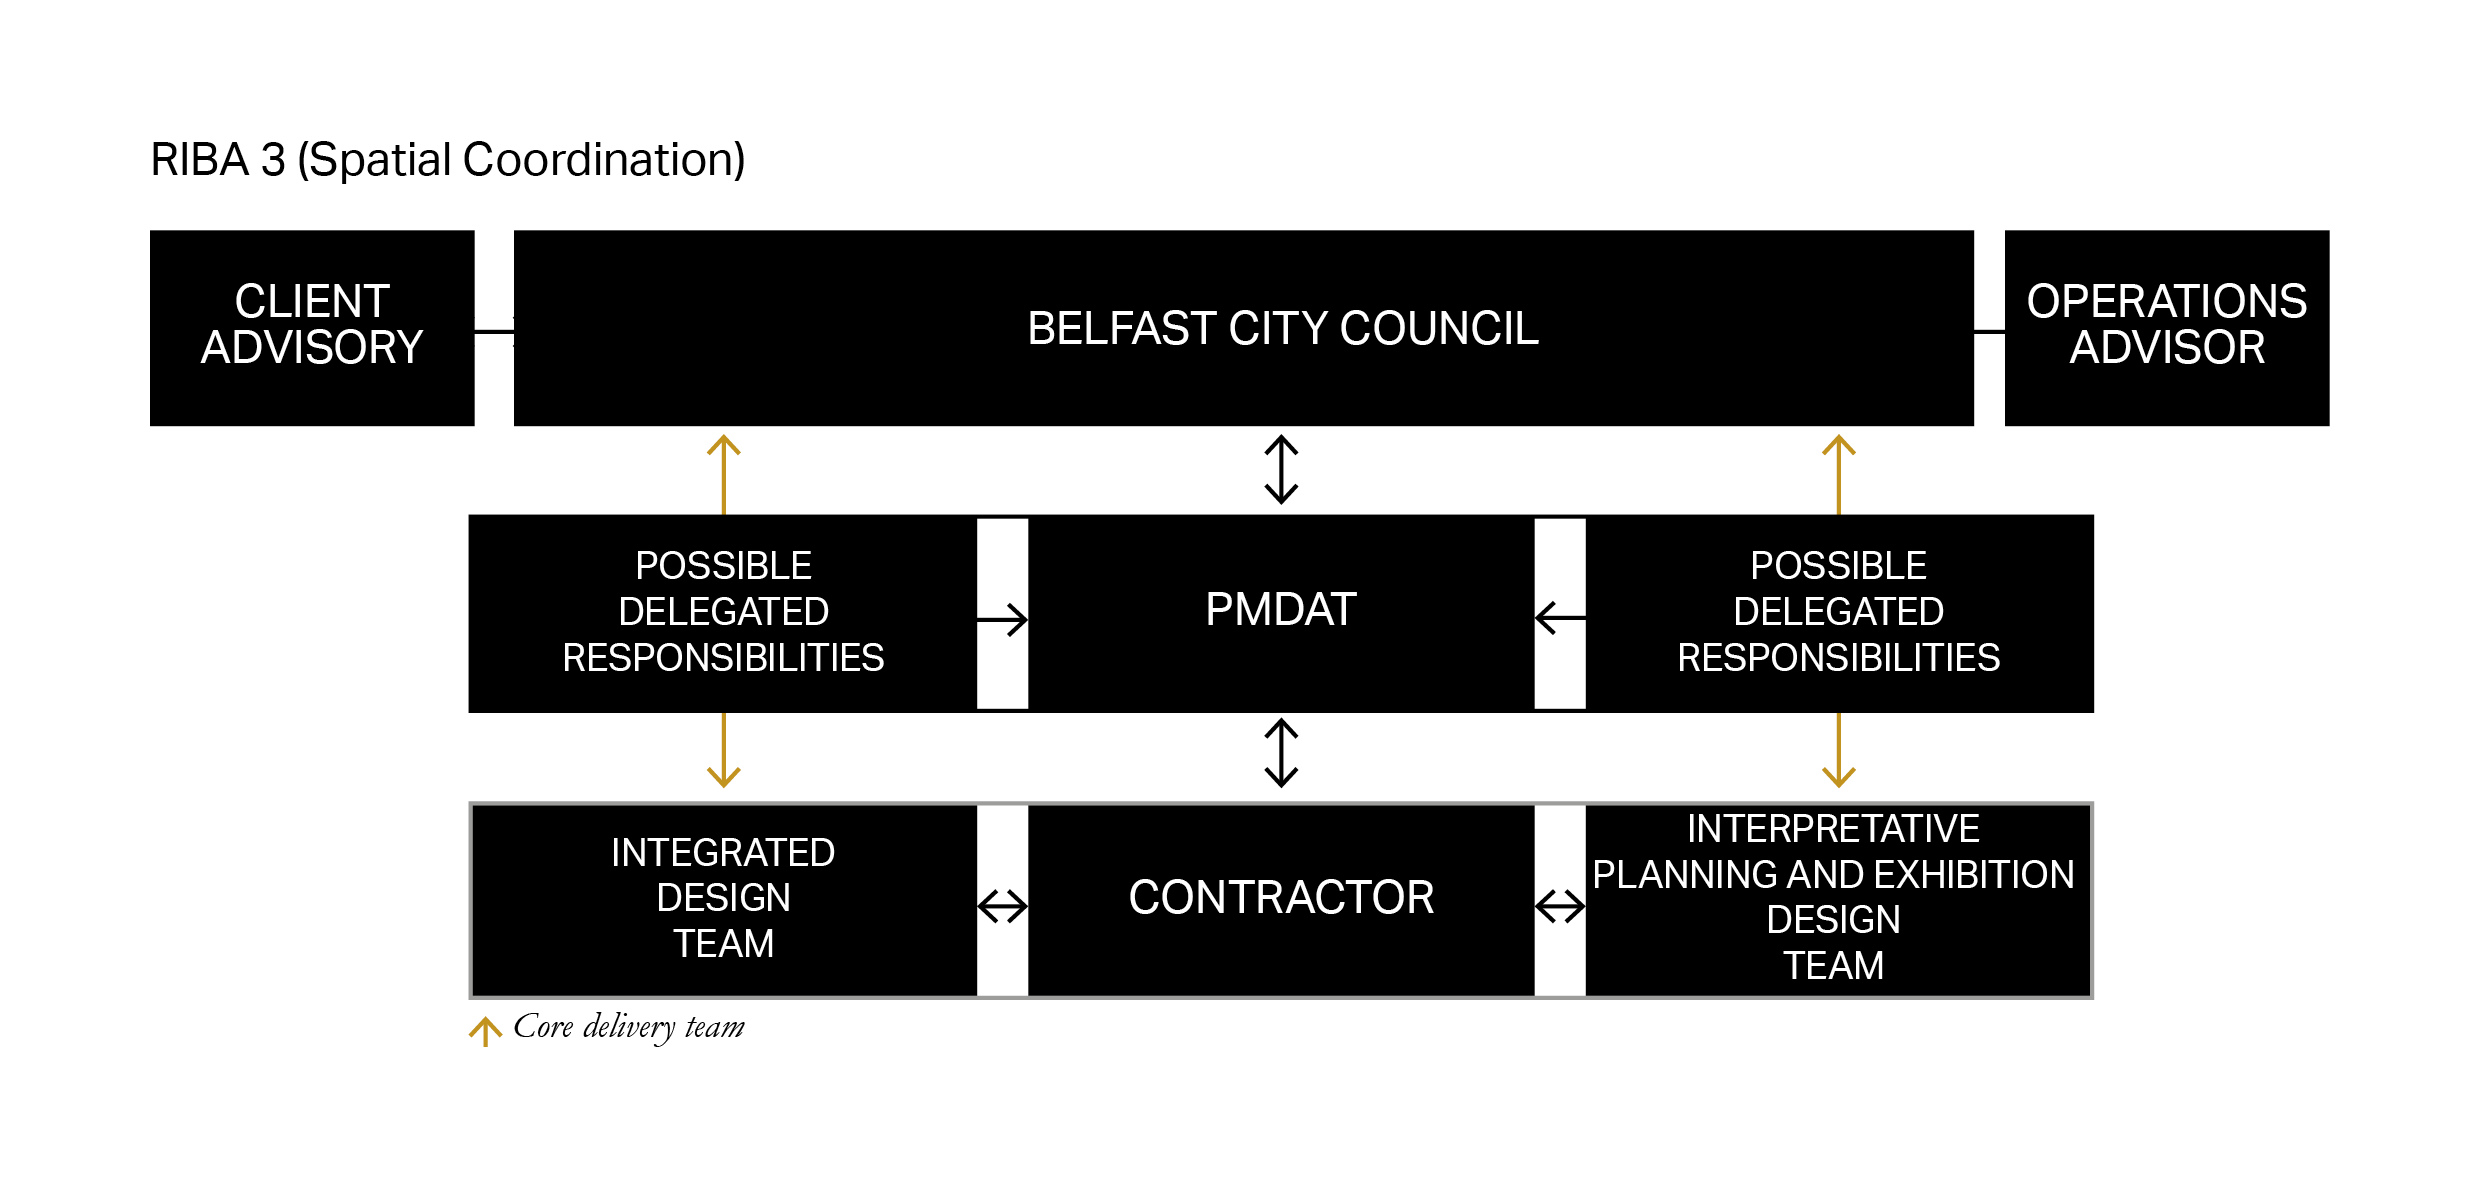 Indicative project team structures per RIBA stage